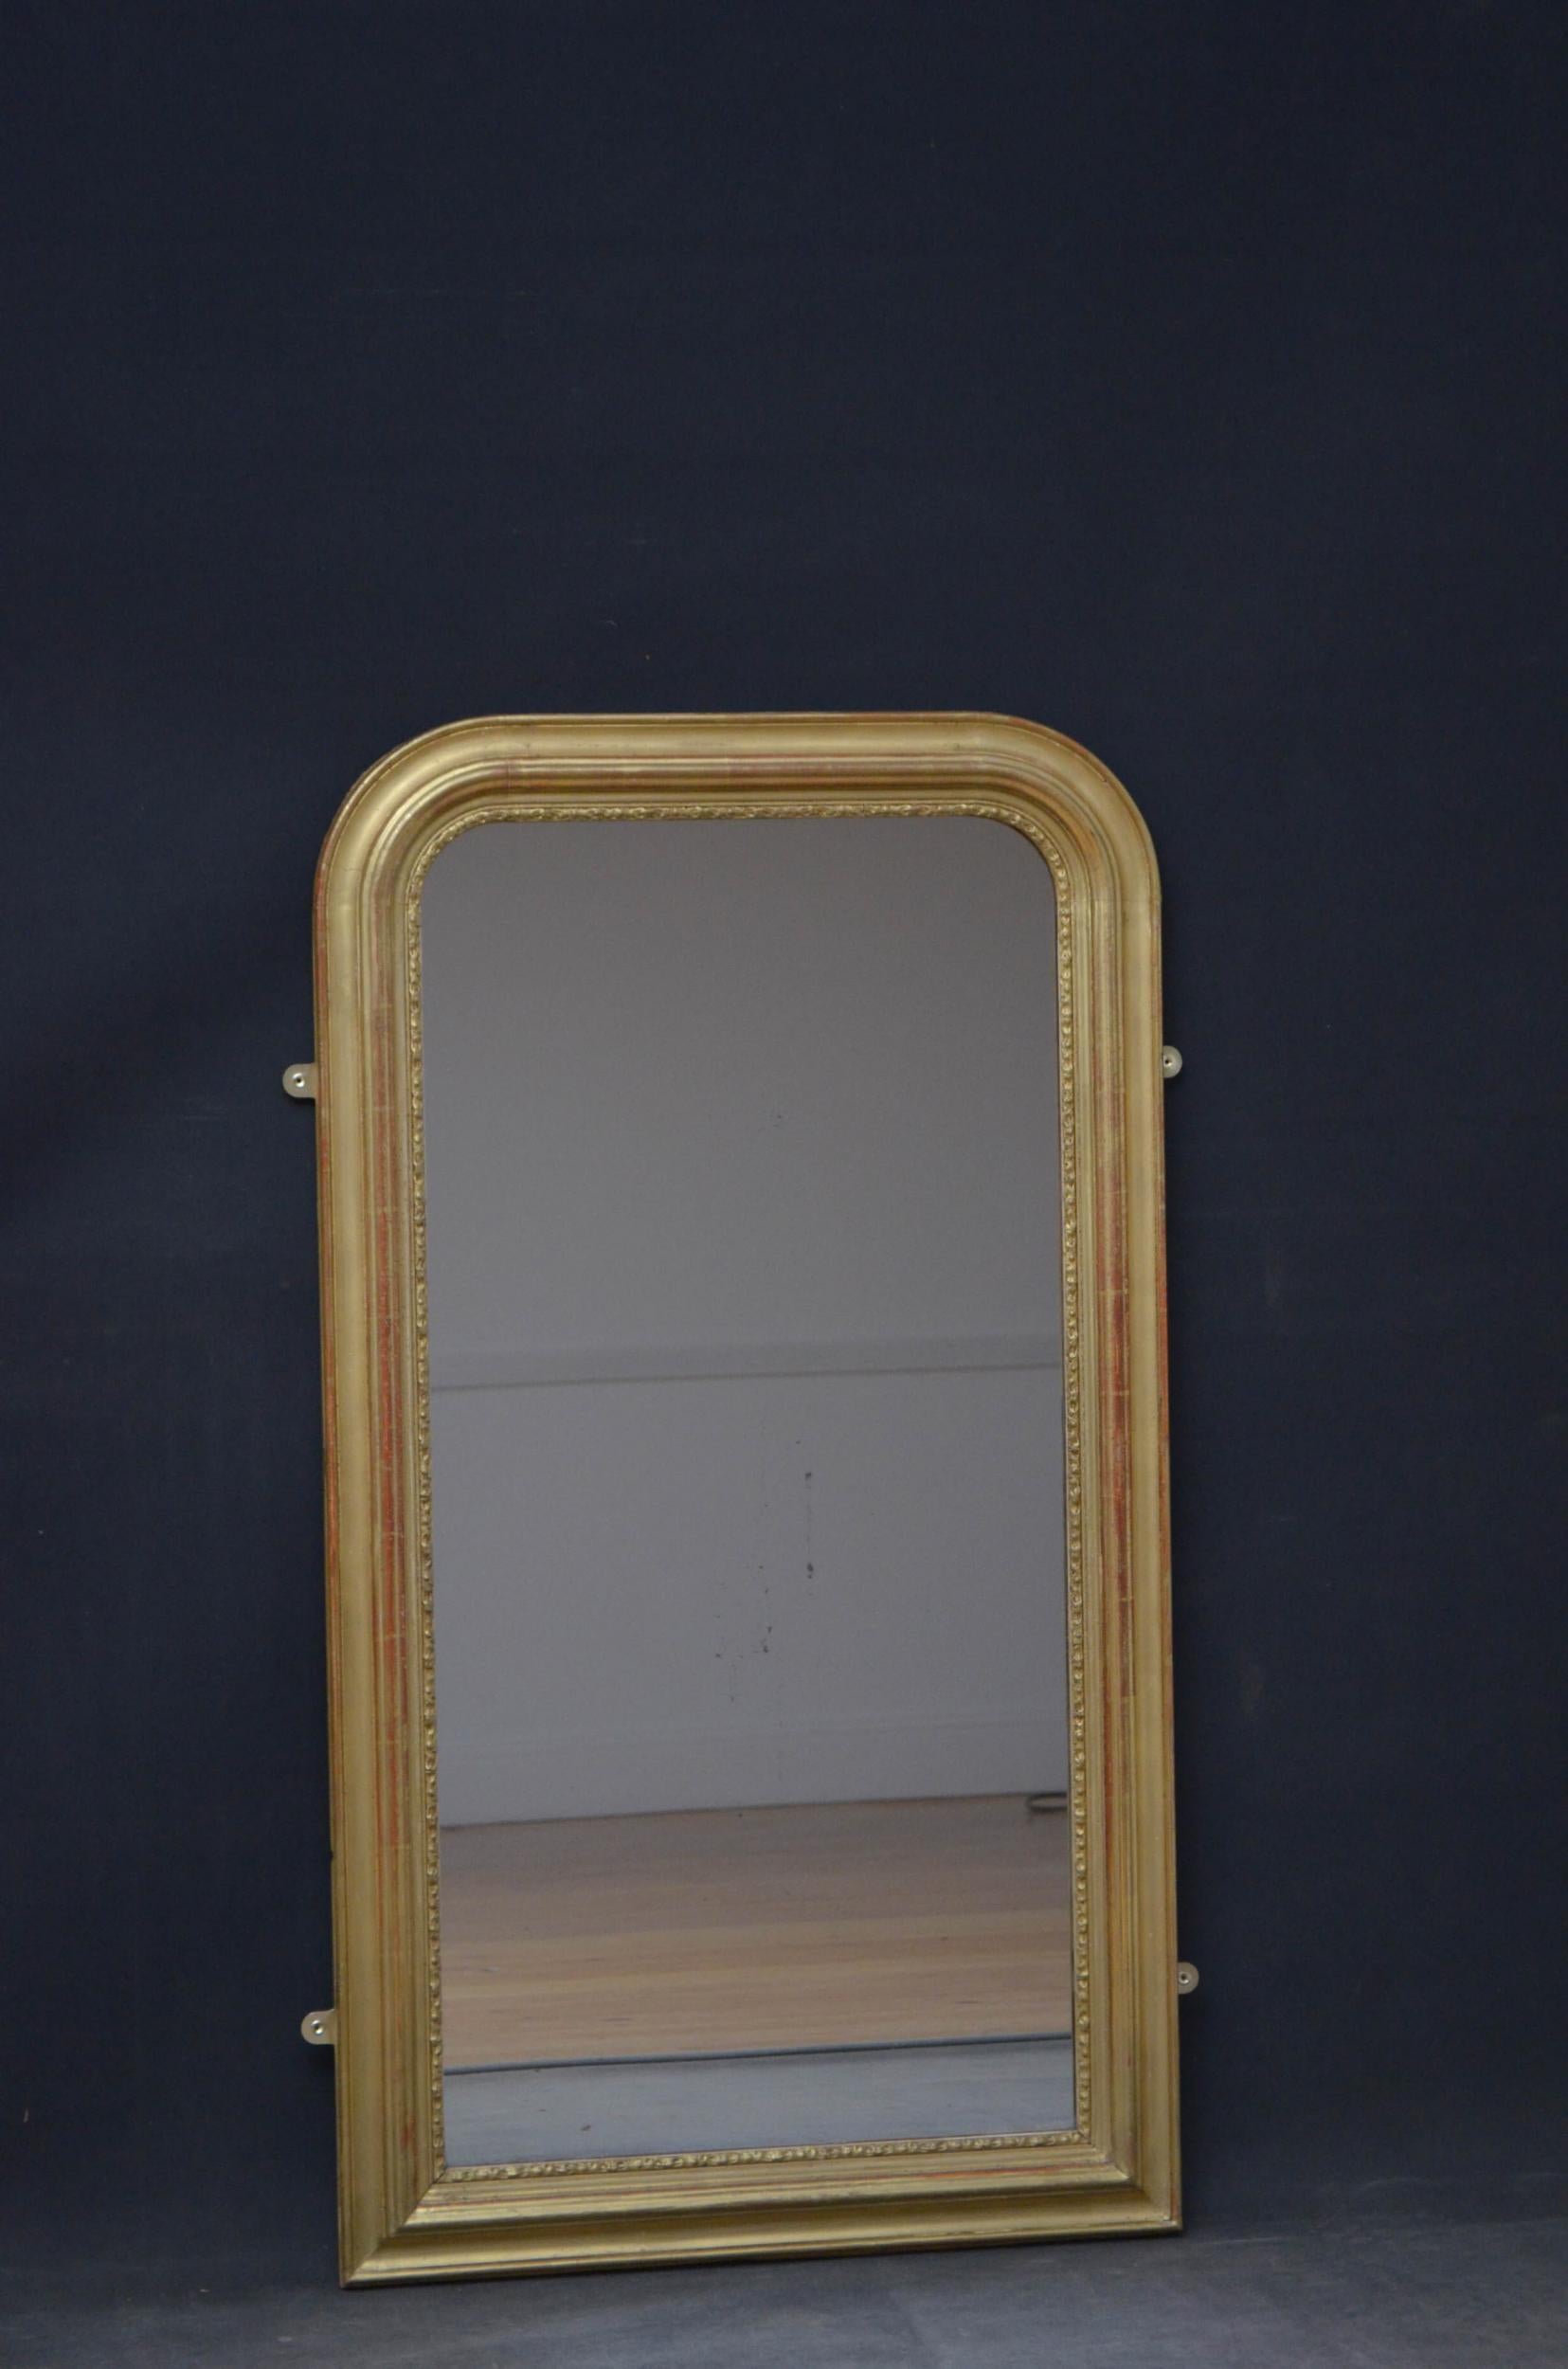 Sn4933 Louis Philippe design 19th century pier mirror, having original glass with some imprecations in carved, shaped and arched gilded frame. This antique mirror retains its original glass, gilt and backboards, all in home ready condition, circa